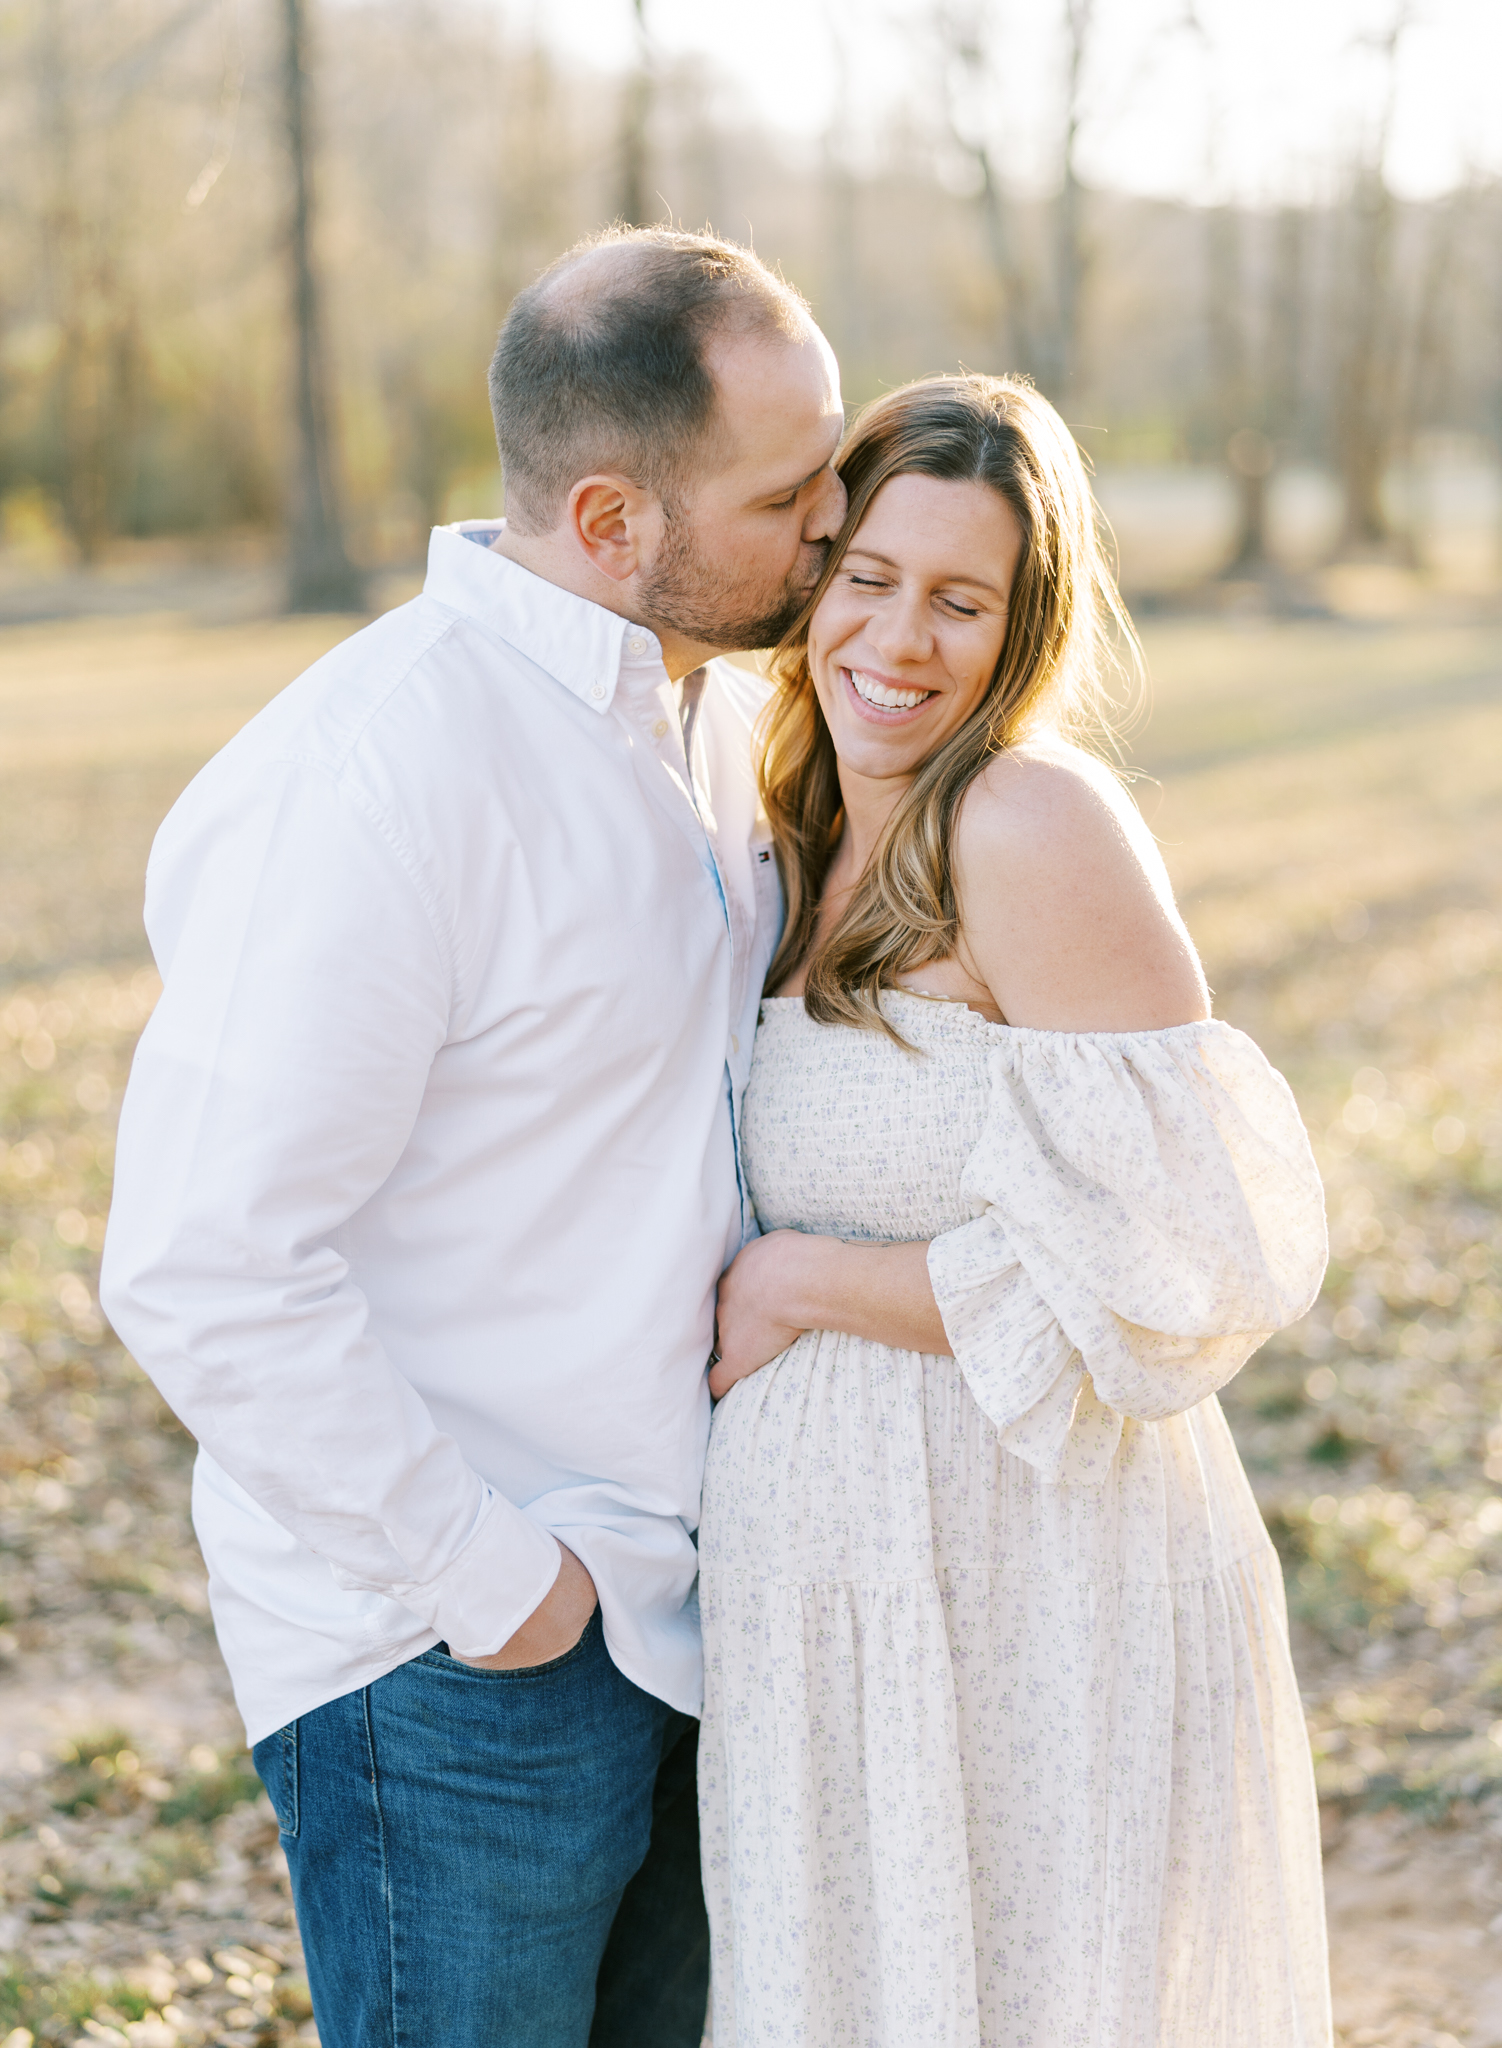 Husband kissing adorable expectant wife on the side of the cheek in winter photoshoot